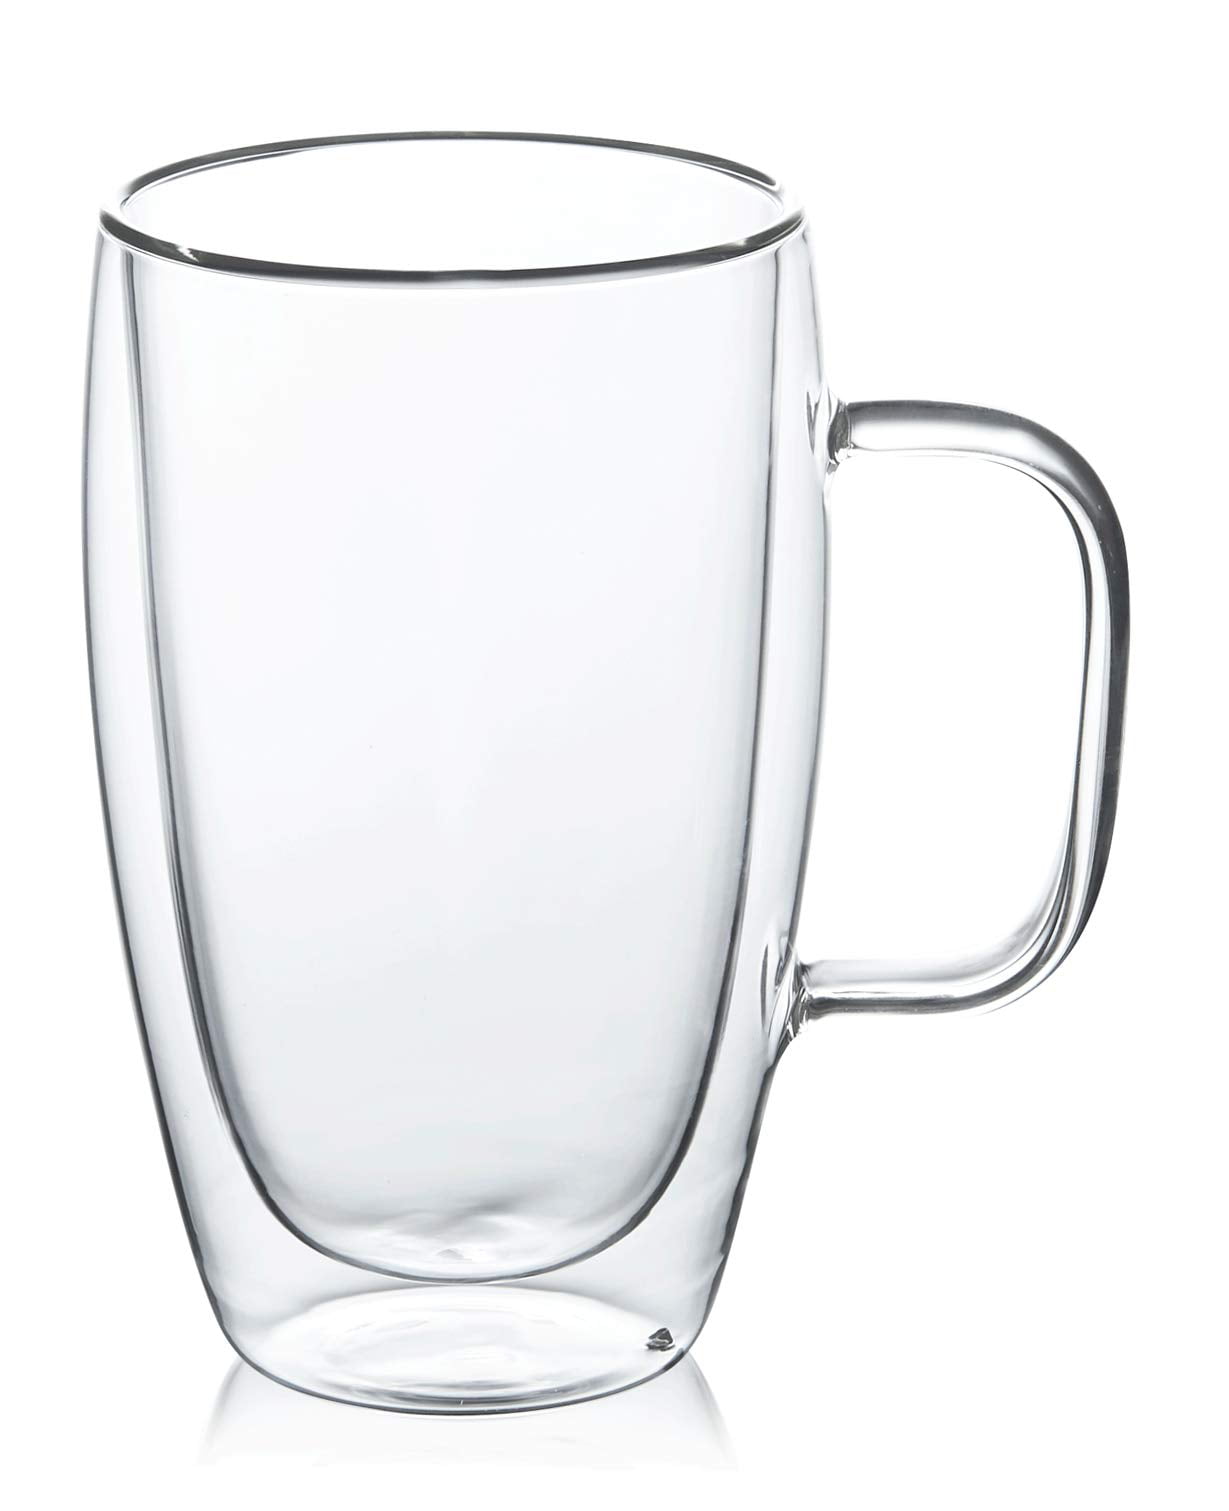 Aquach Glass Mugs 20 oz Set of 2, Extra Large Clear Glass Cup with Handle  for Hot/Cold Coffee Tea Beverage, Drinking Glasses